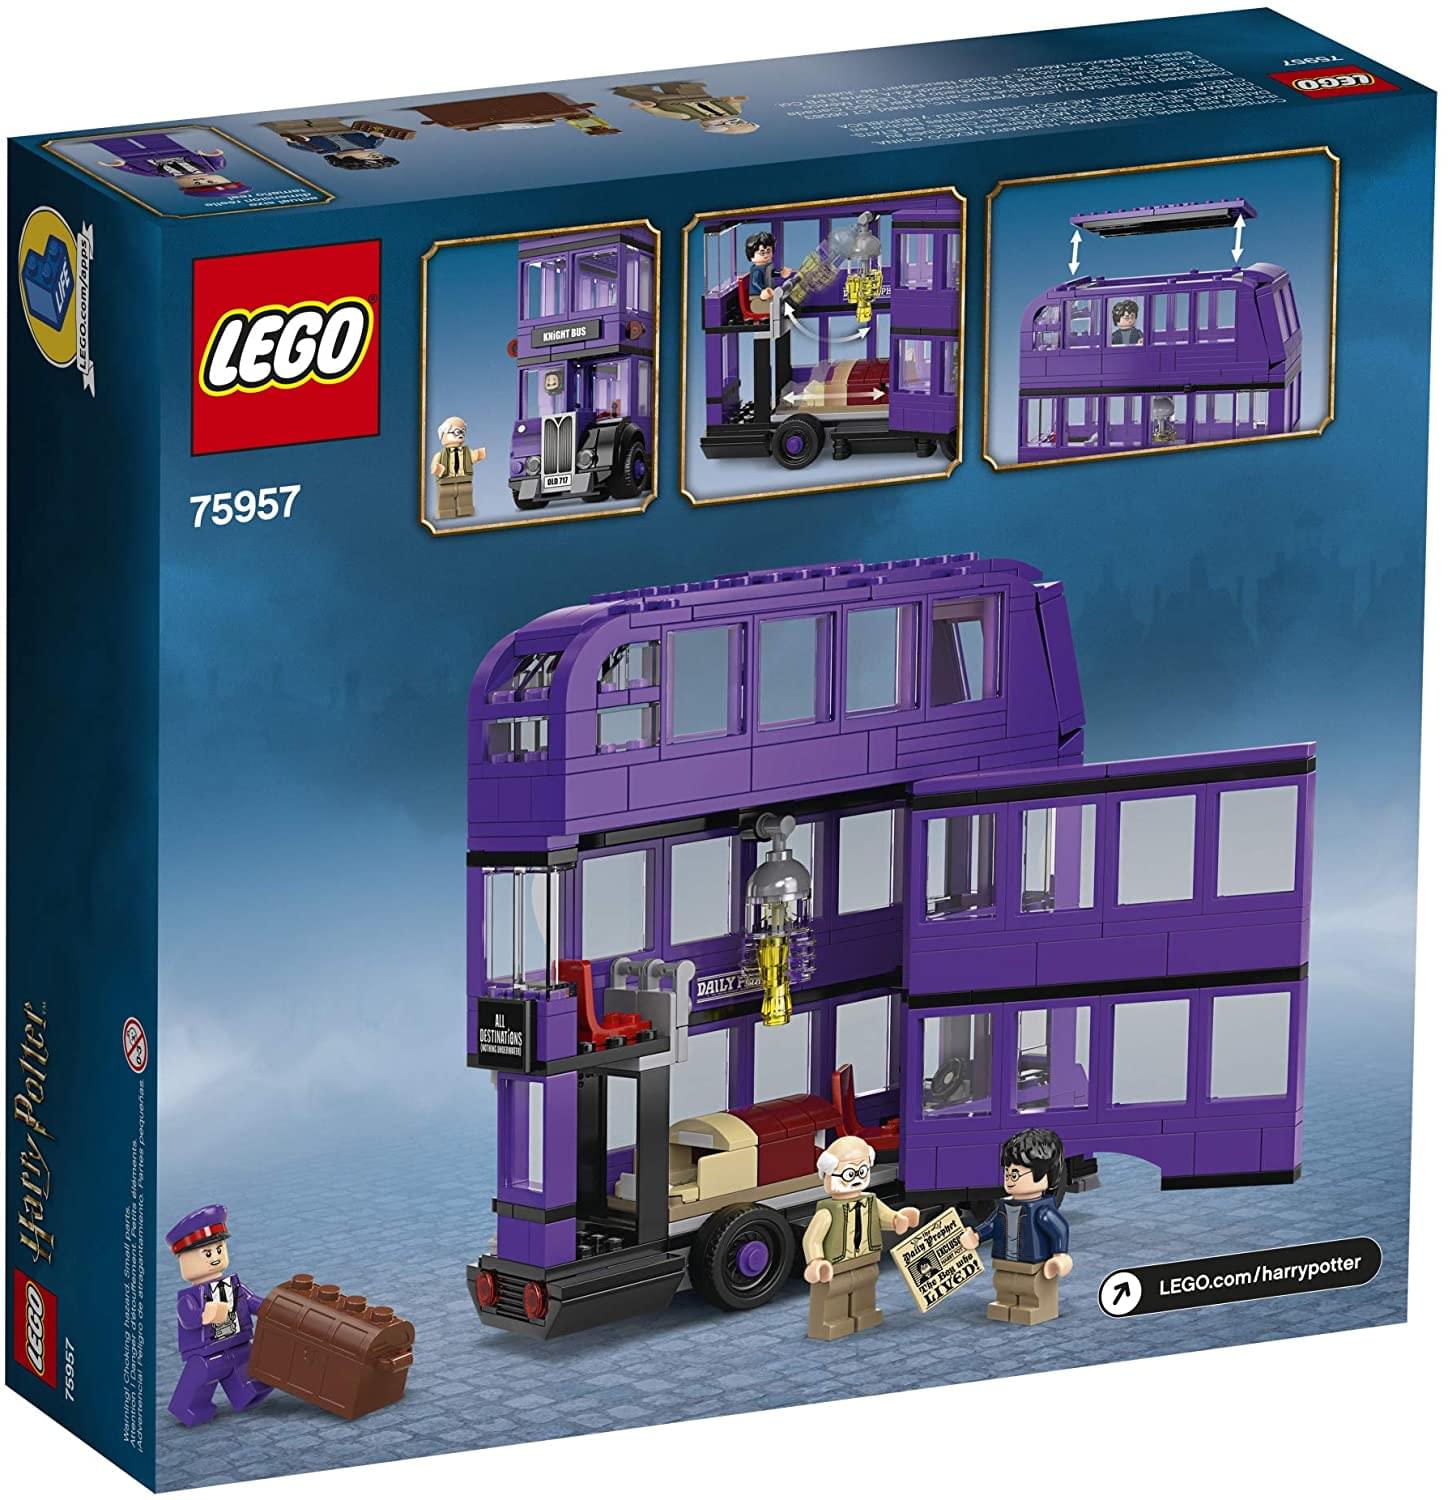 LEGO Harry Potter 75957 The Knight Bus 403 Piece Building Kit